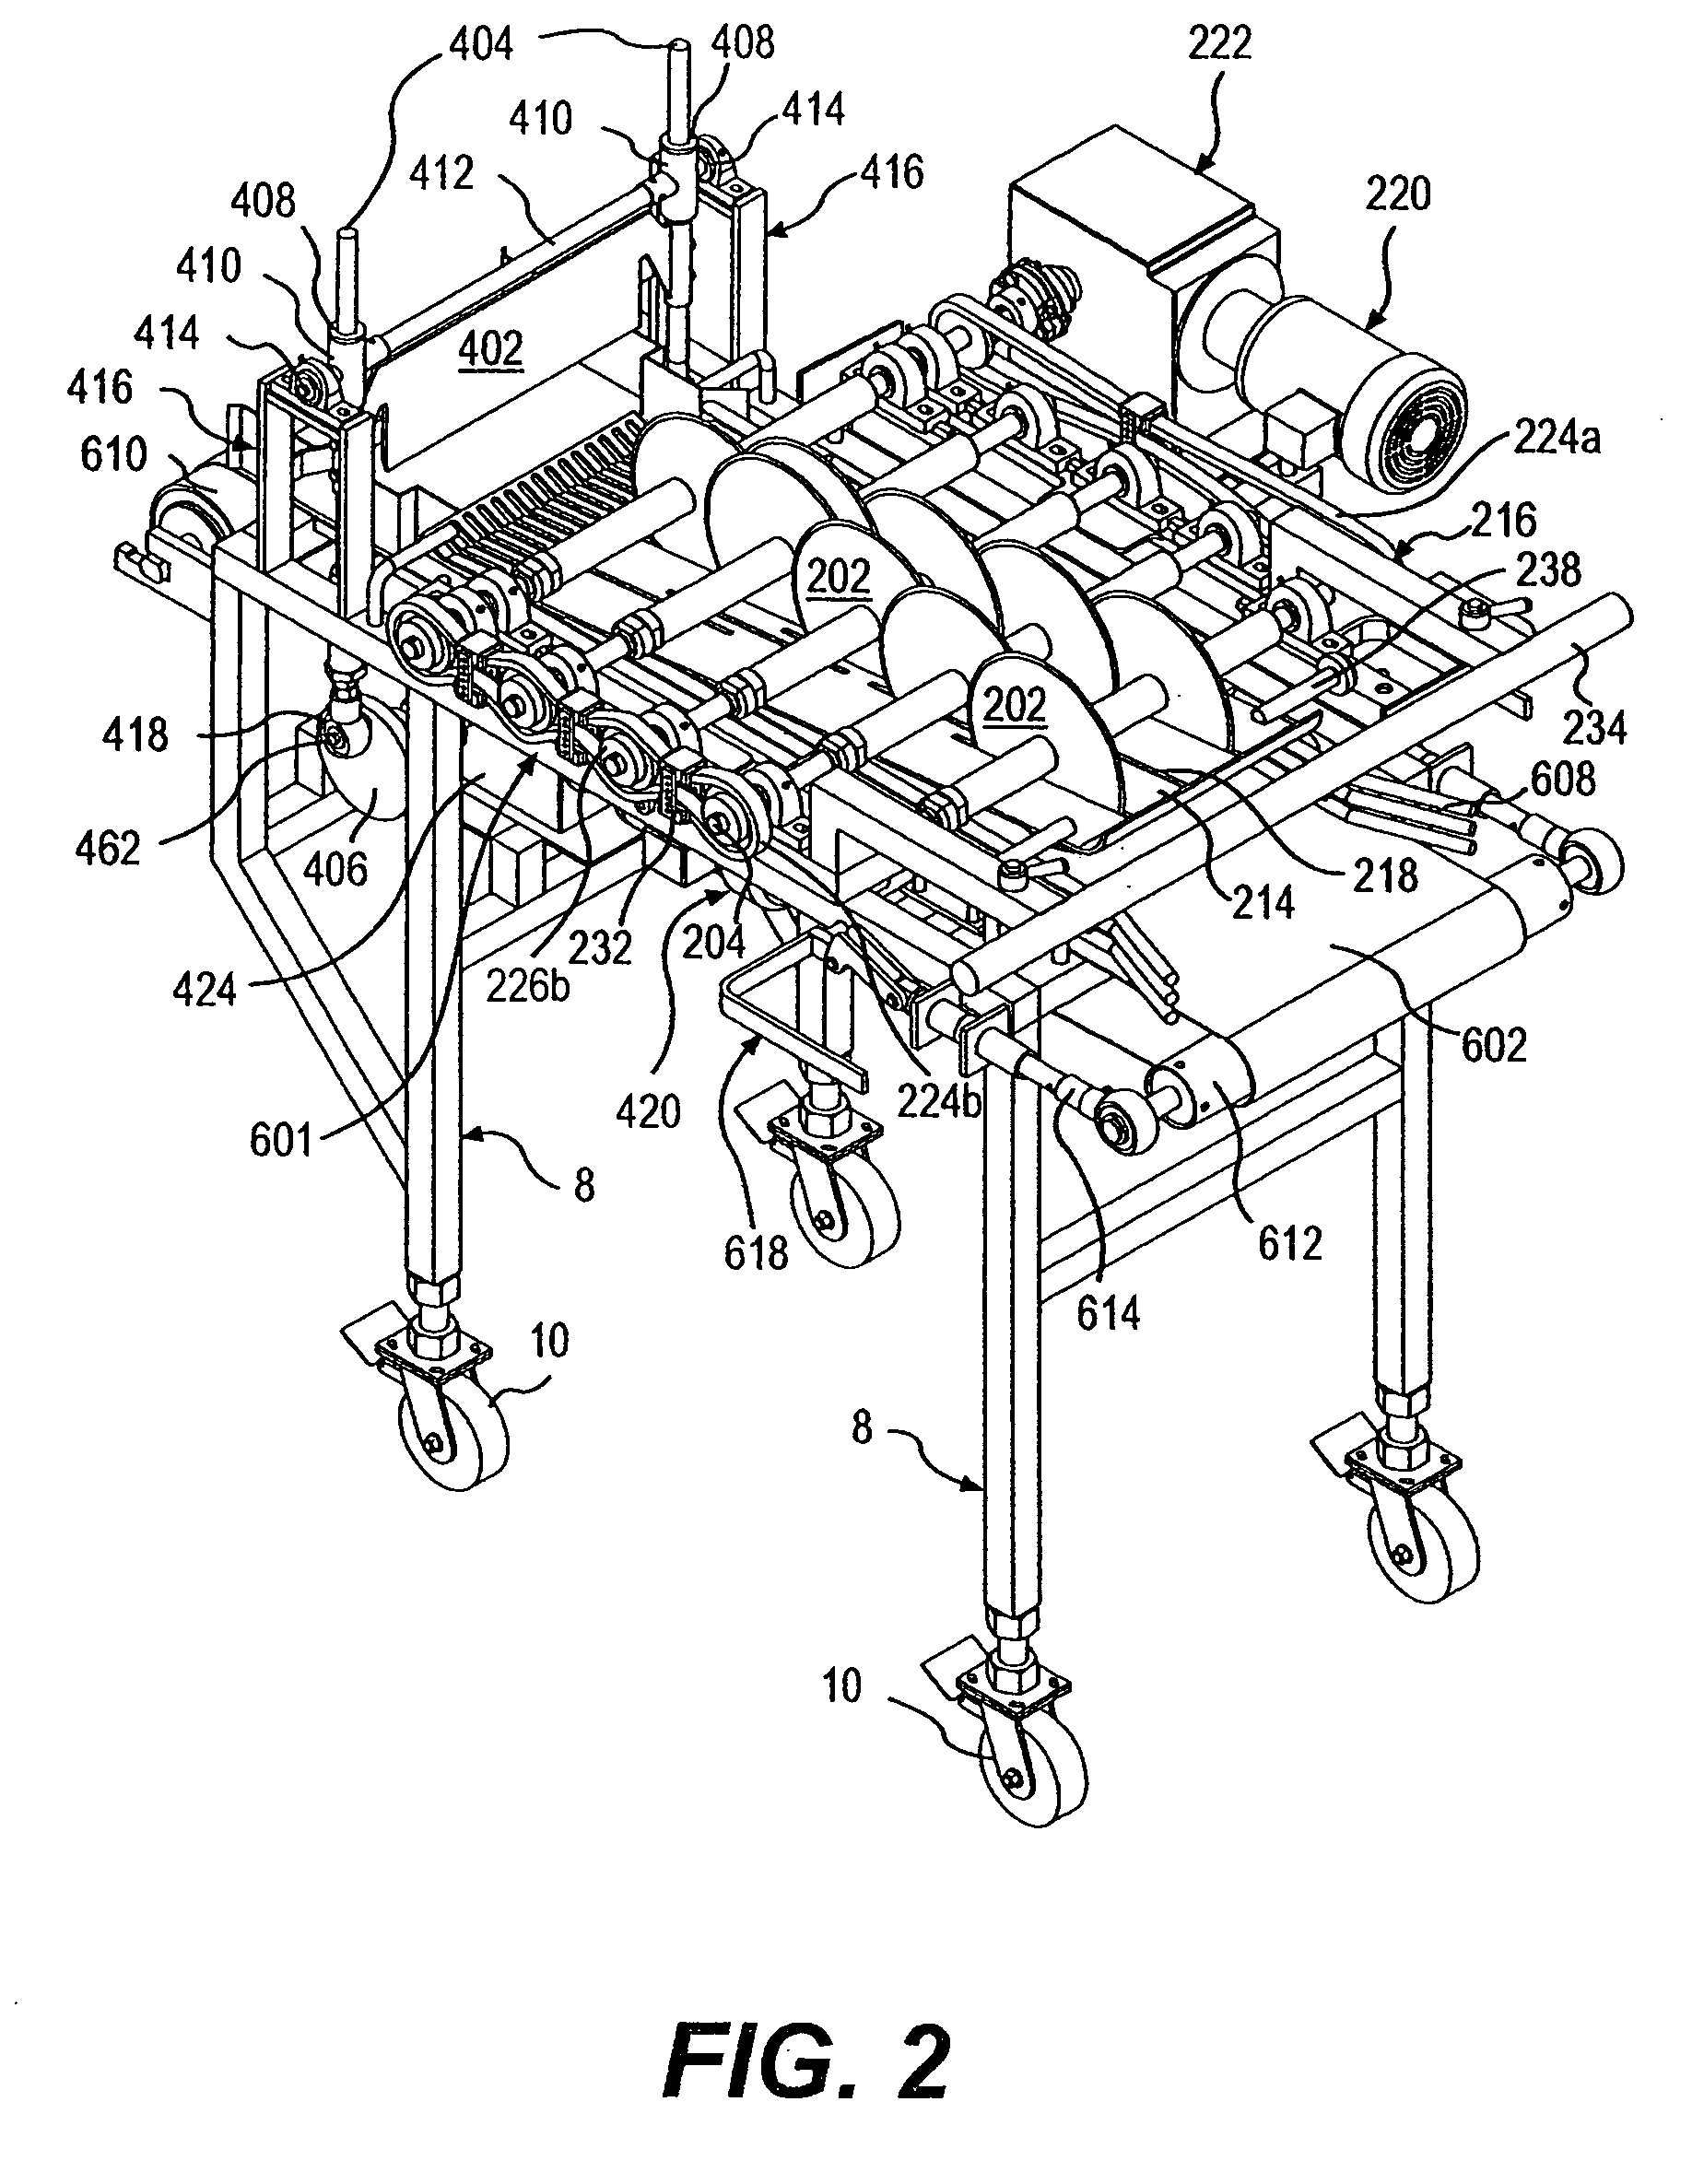 Apparatus for dicing a deformable product